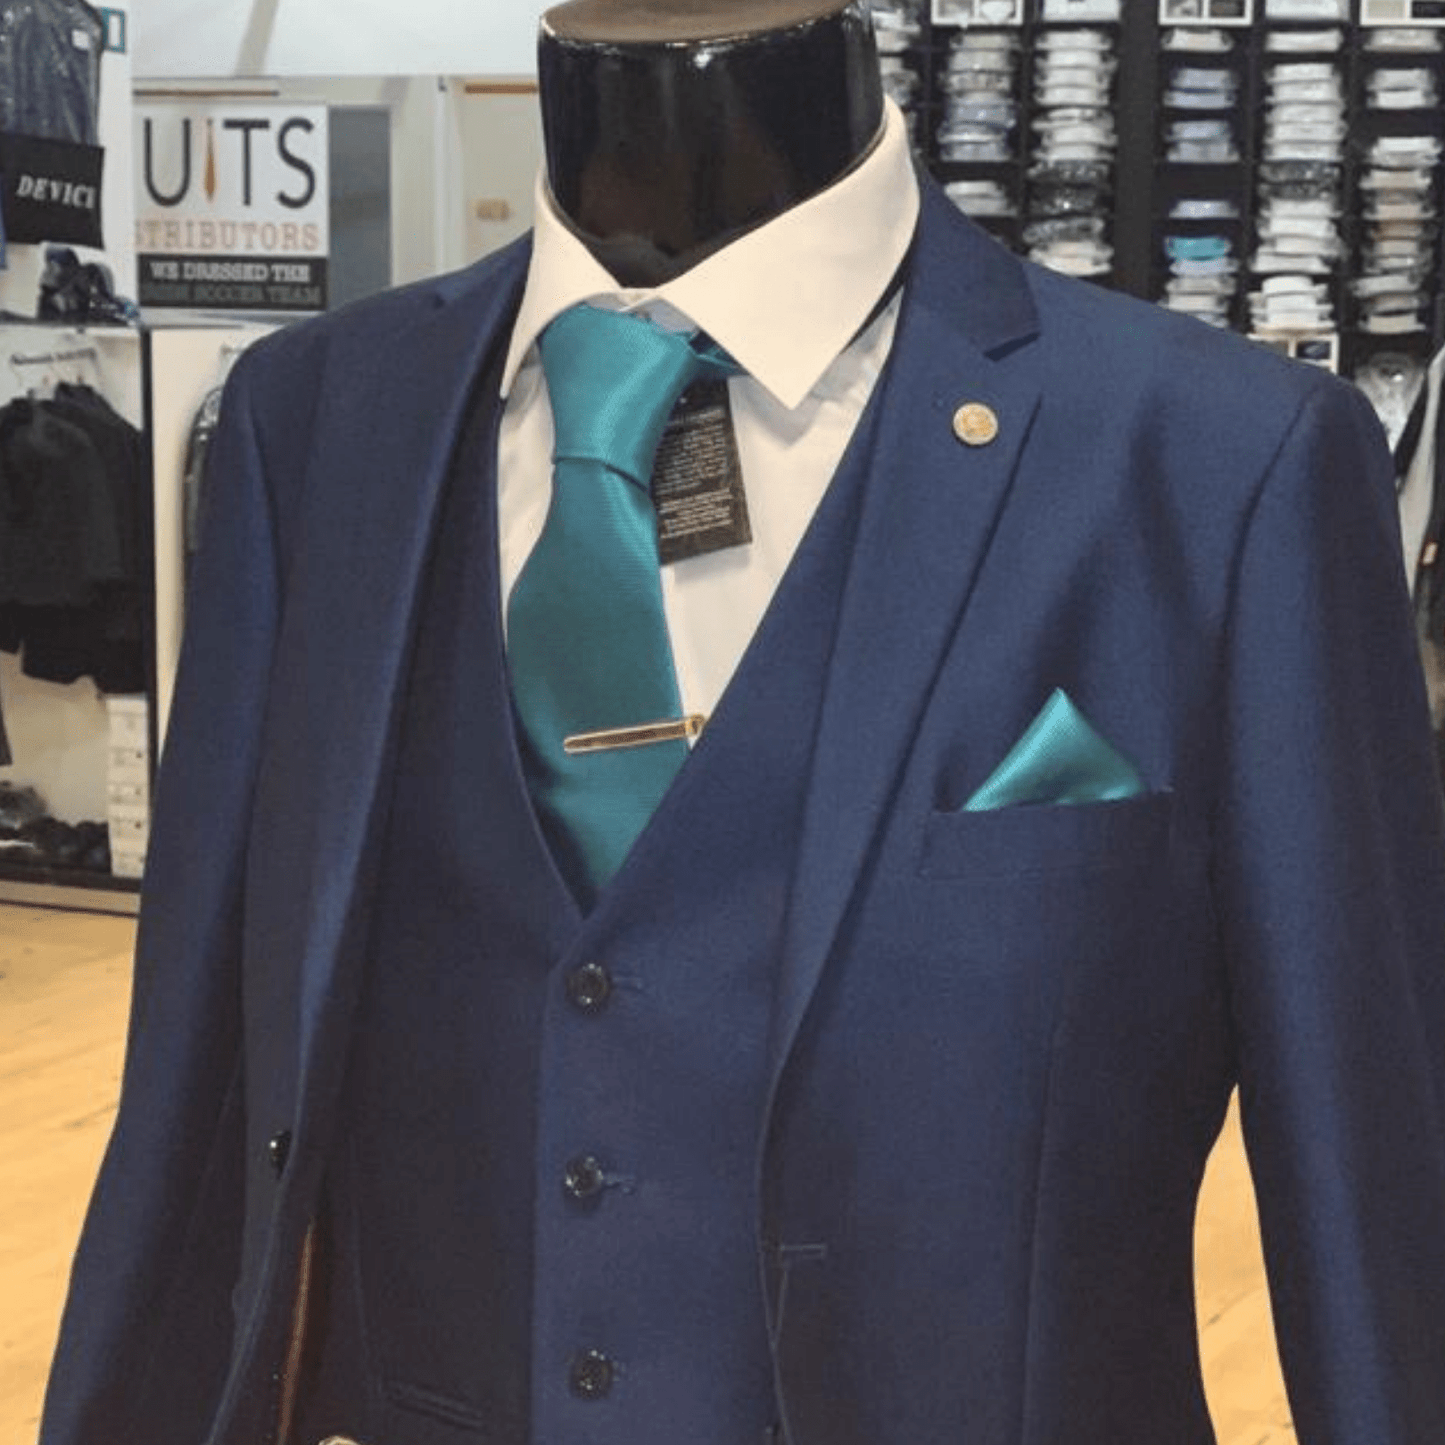 Kingsley Blue, a Paul Andrews fitted suit, all sizes available.